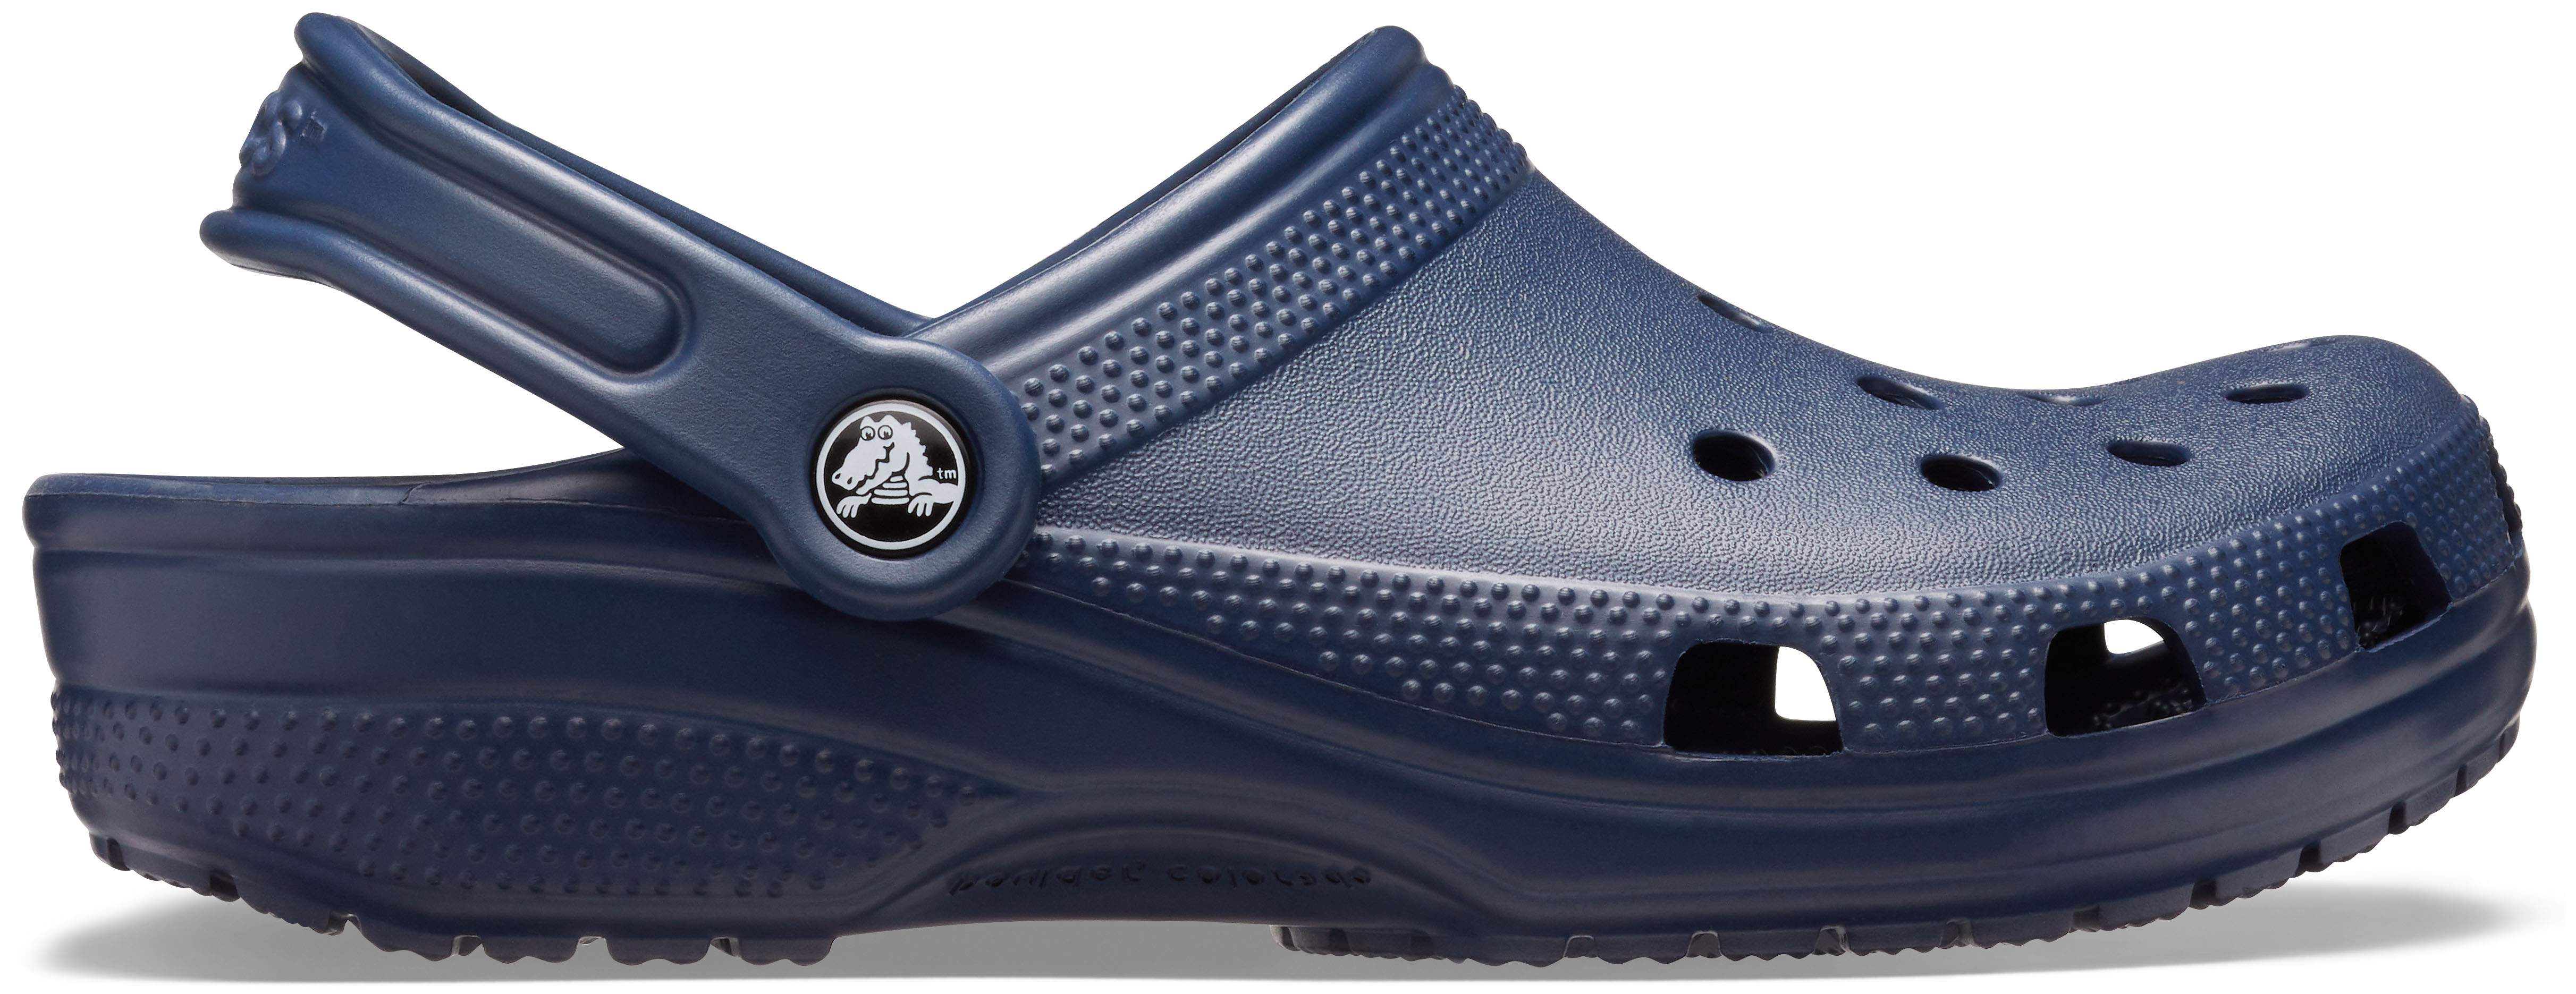 crocs swiftwater mesh review